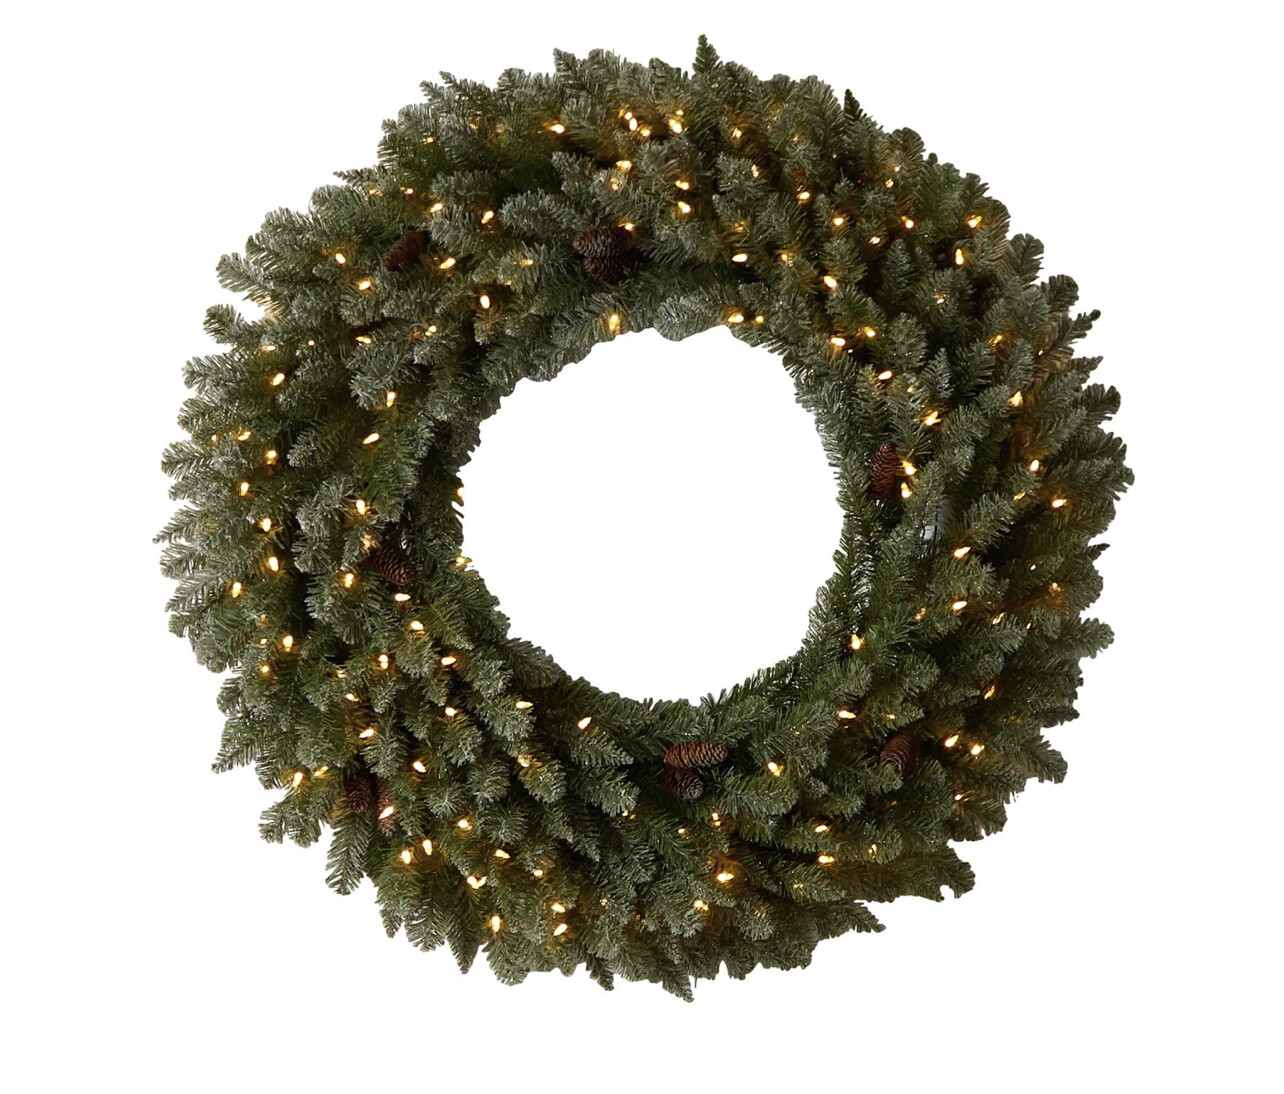 4’ Large Flocked Christmas Wreath With Pinecones, 150 Clear LED Lights And 330 Bendable Branches